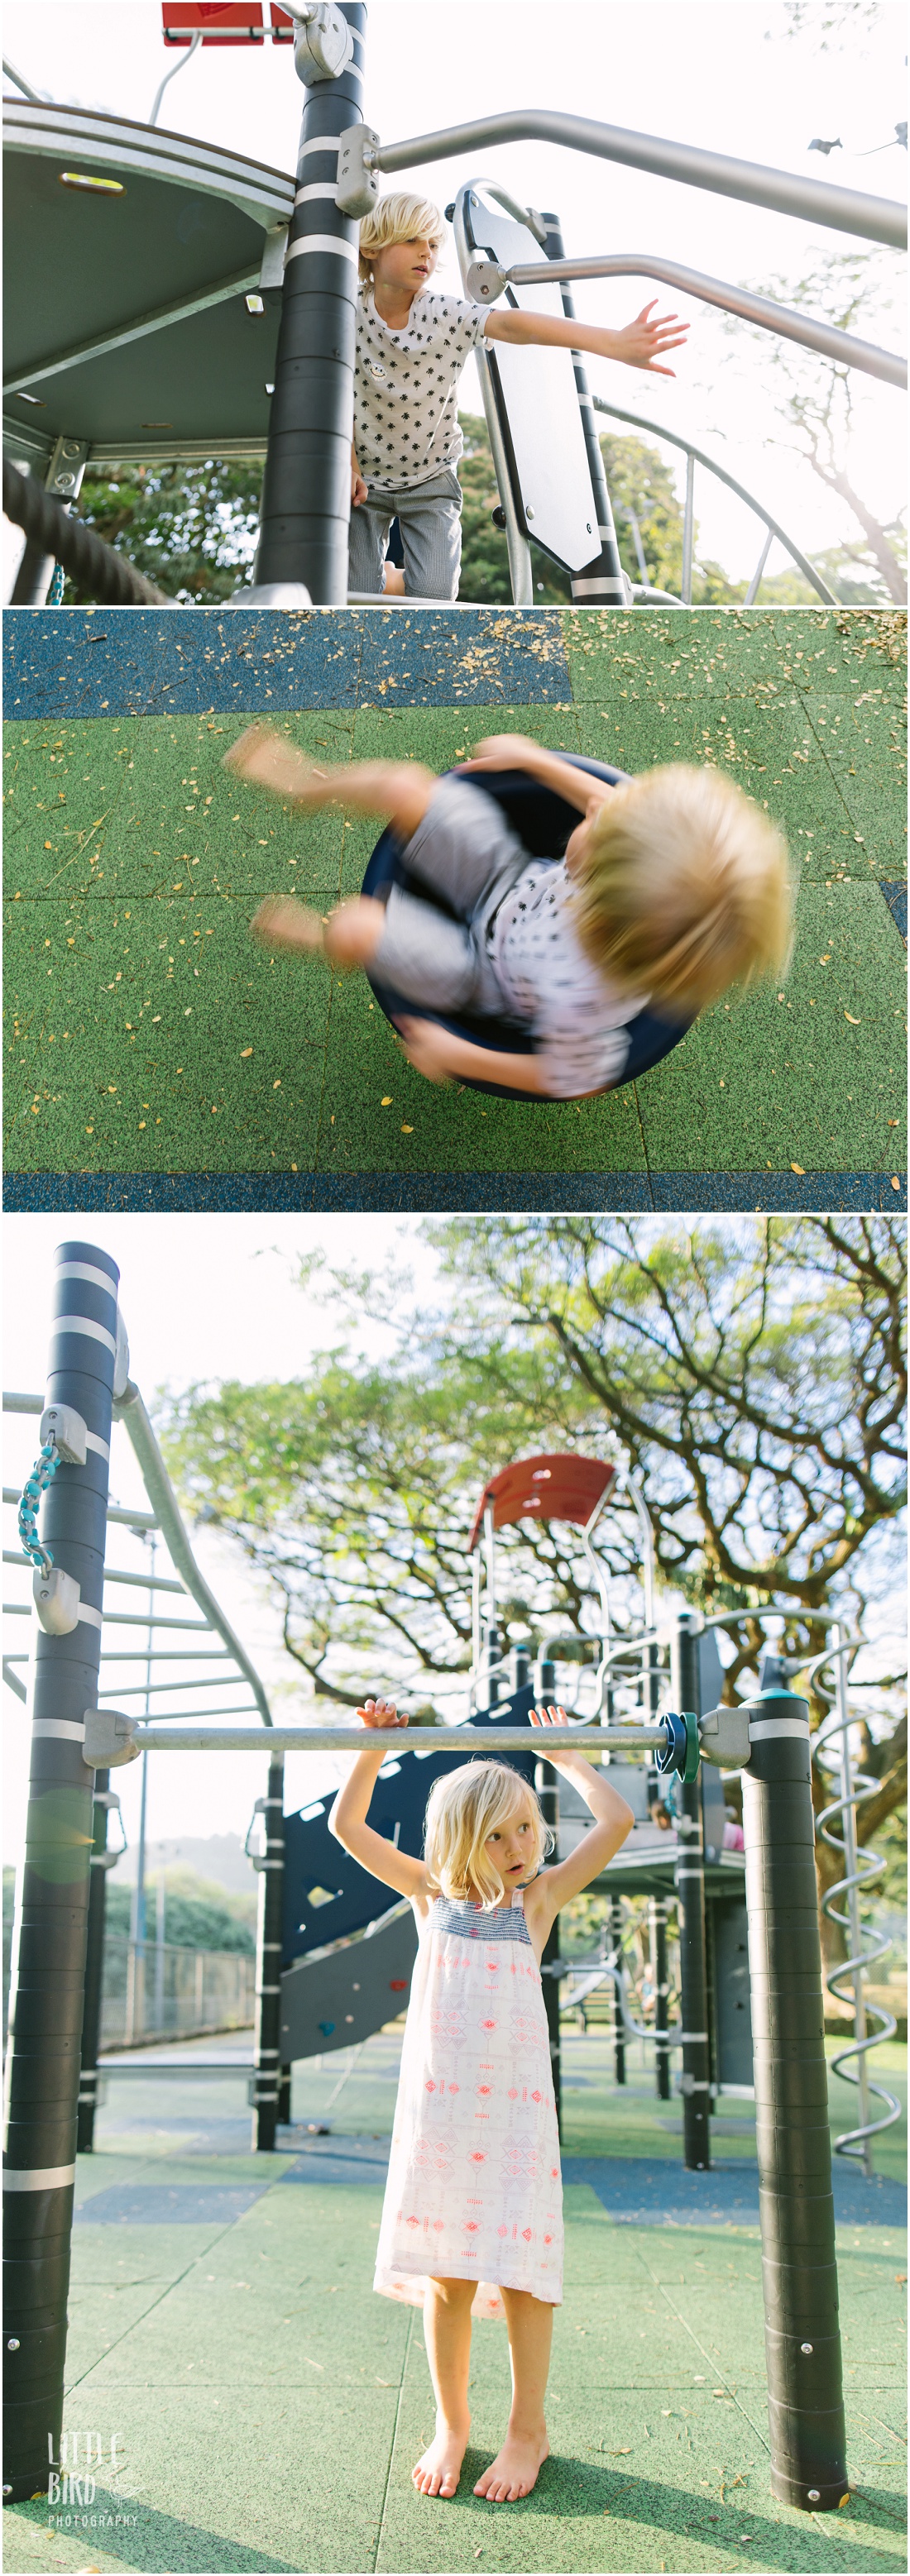 best playgrounds on oahu nuuanu valley